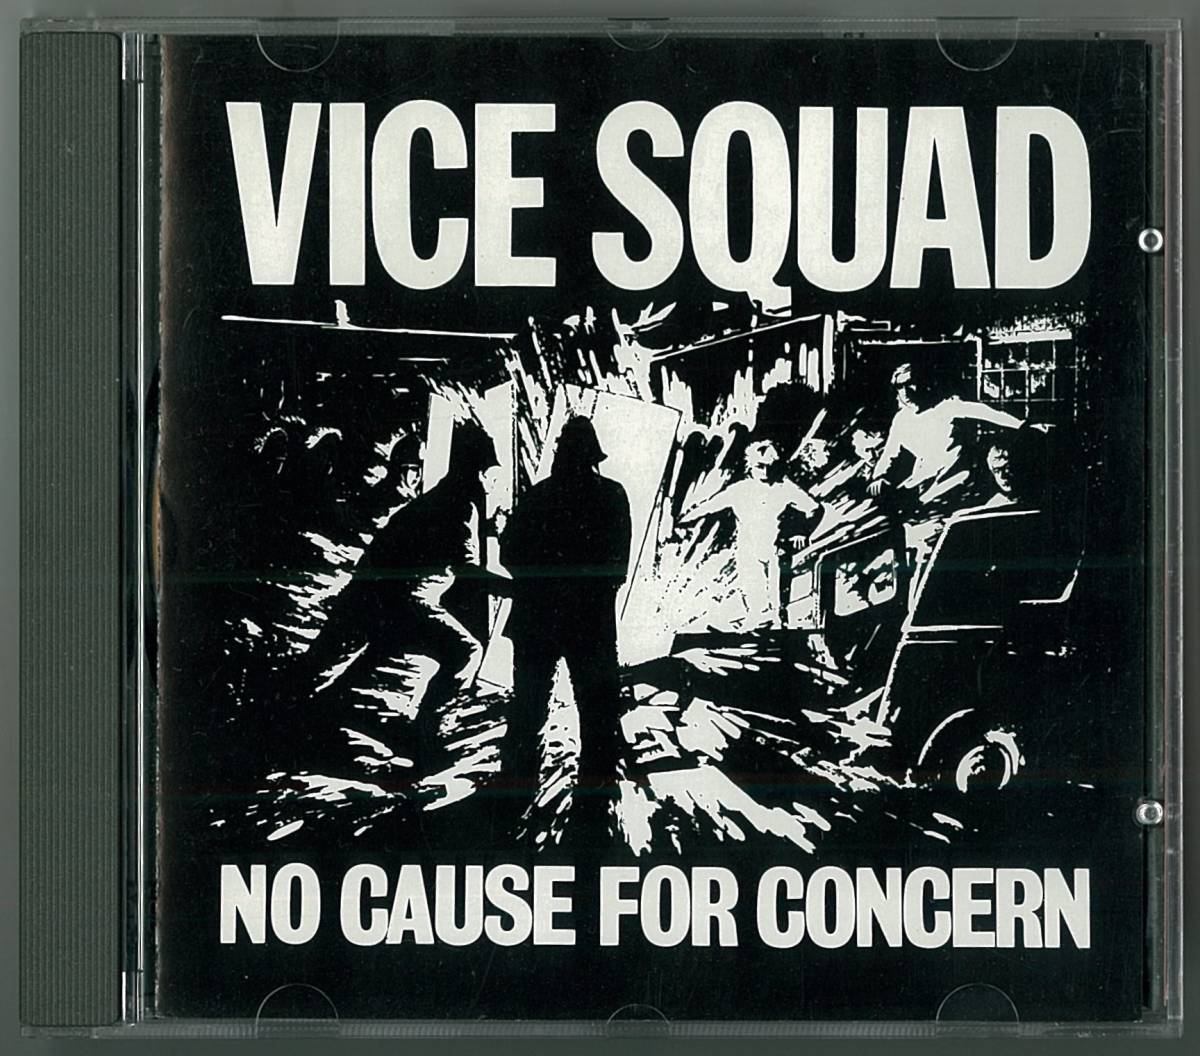 VICE SQUAD ／ NO CAUSE FOR CONCERT　輸入盤ＣＤ　　　検～ beki discharge g.b.h exploited chaos U.K disorder crass_画像1